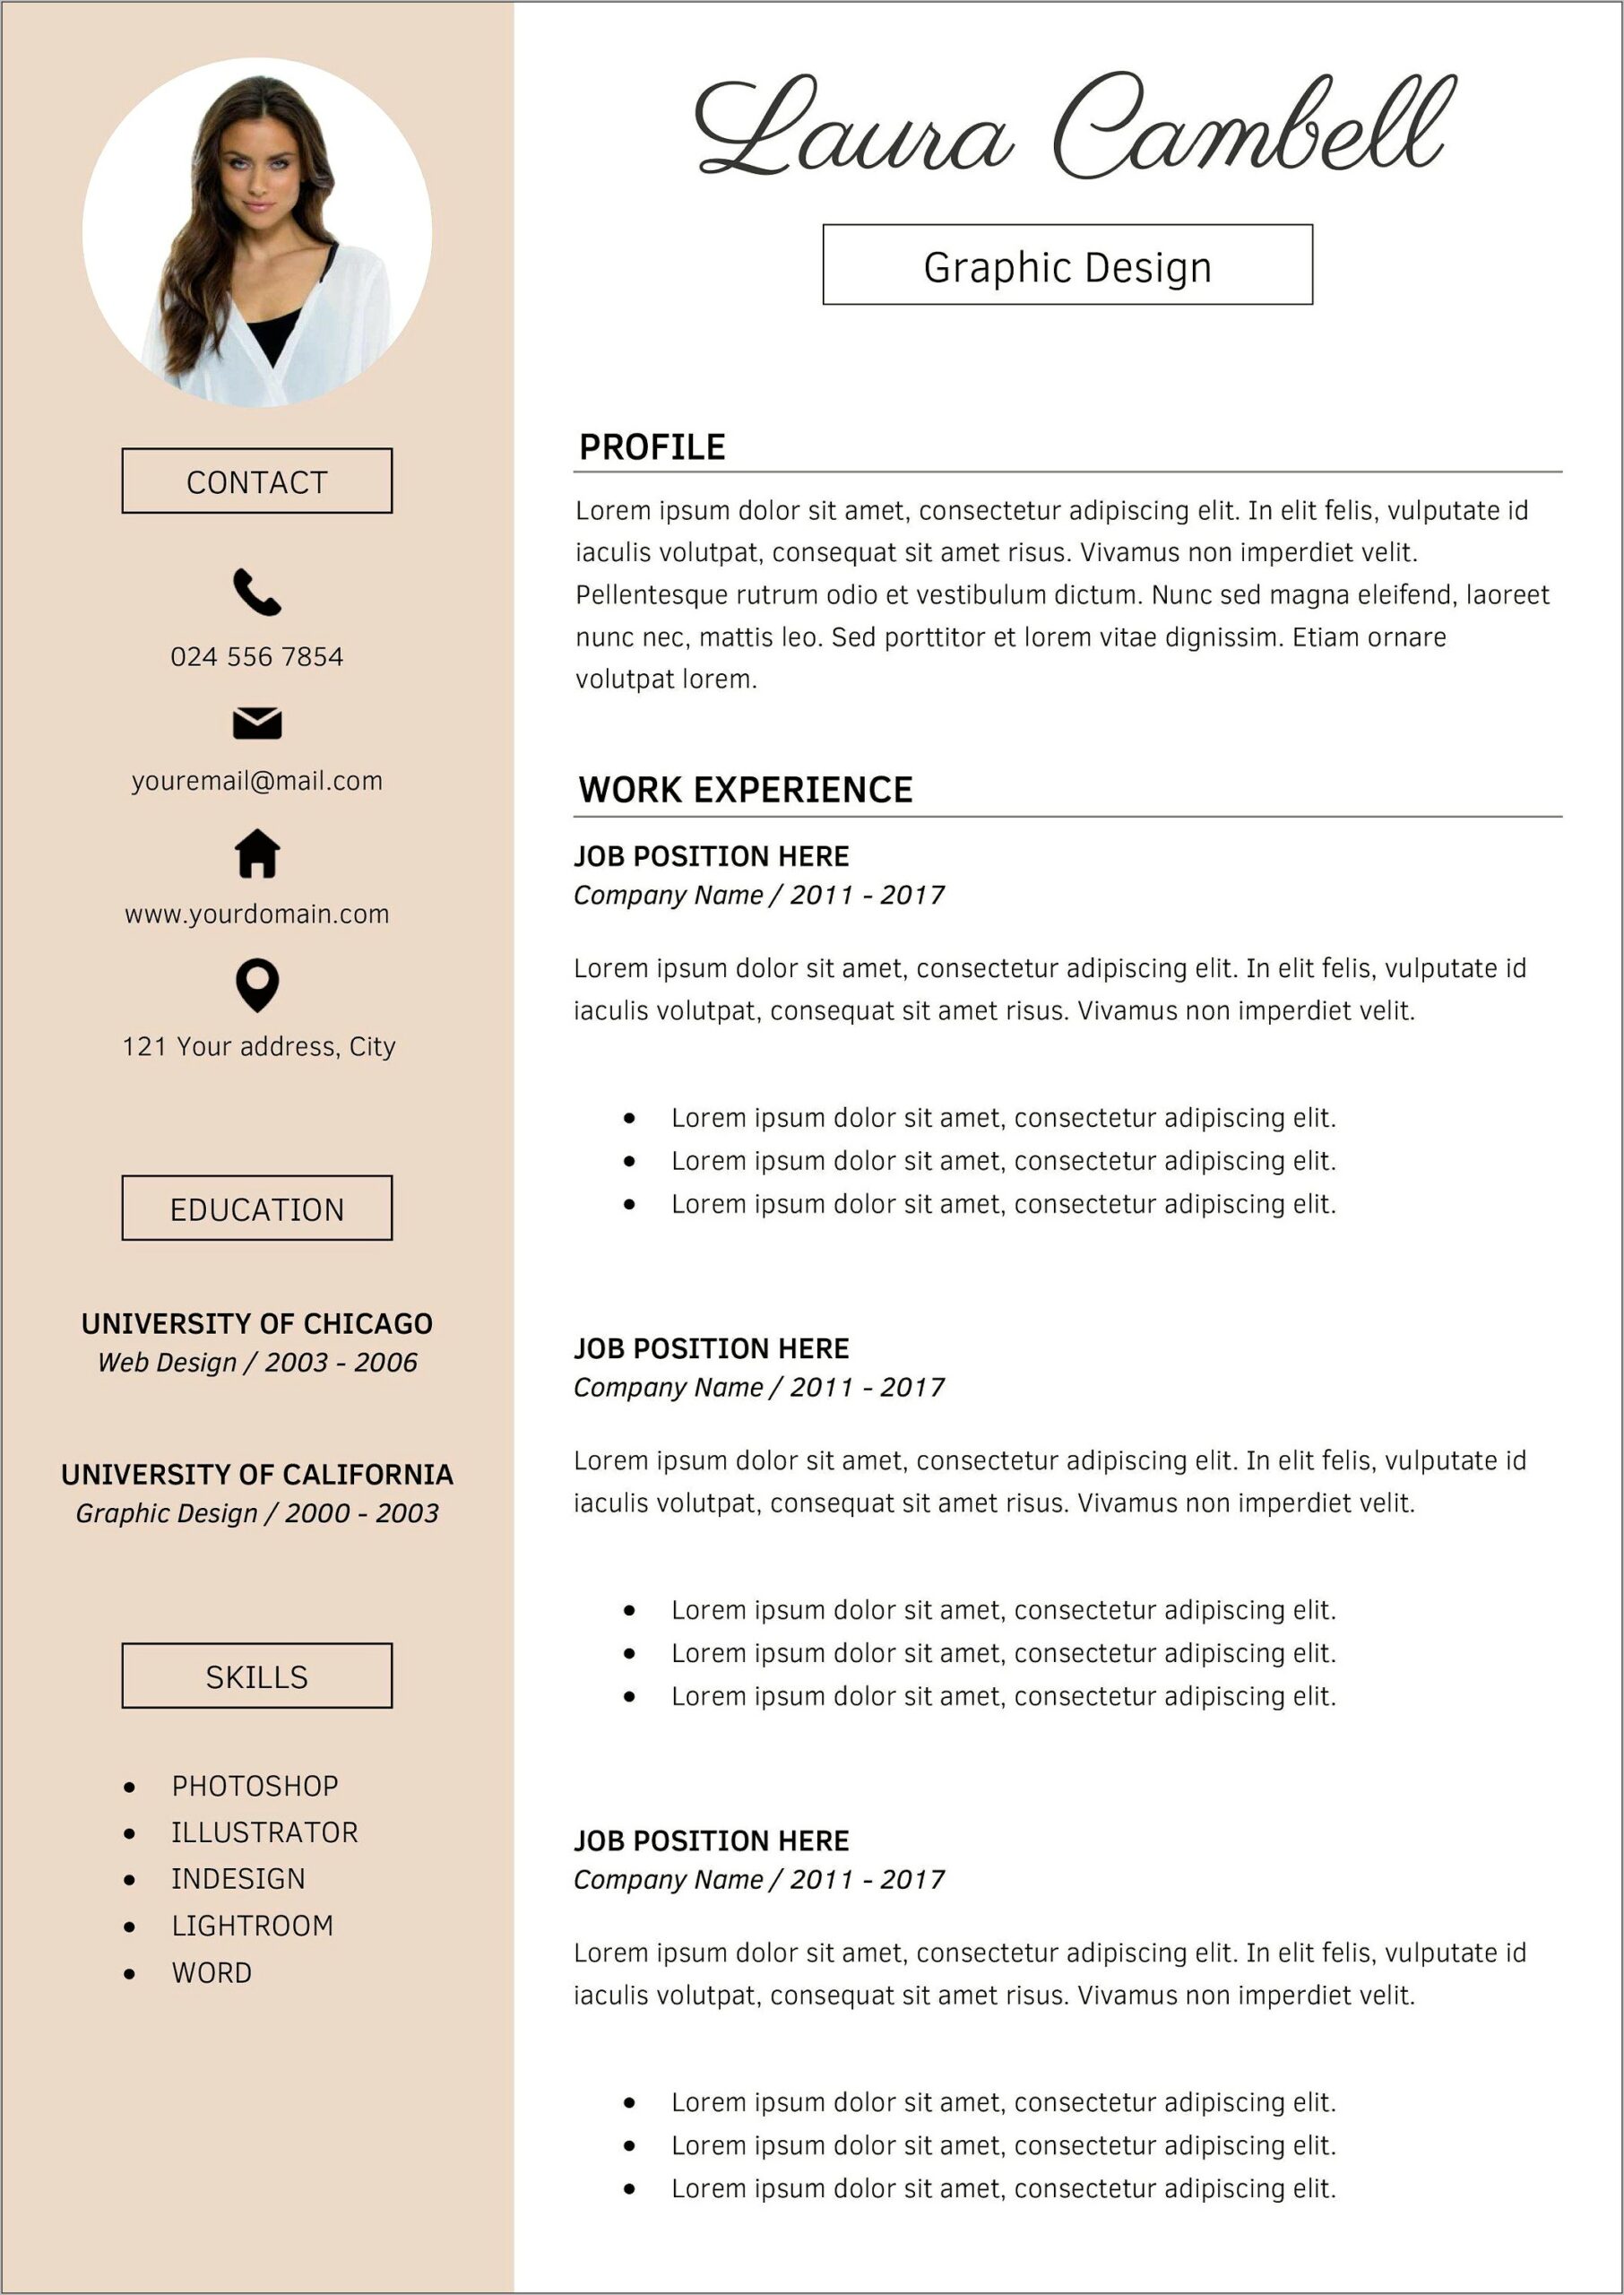 Free Resume Cover Letter Download